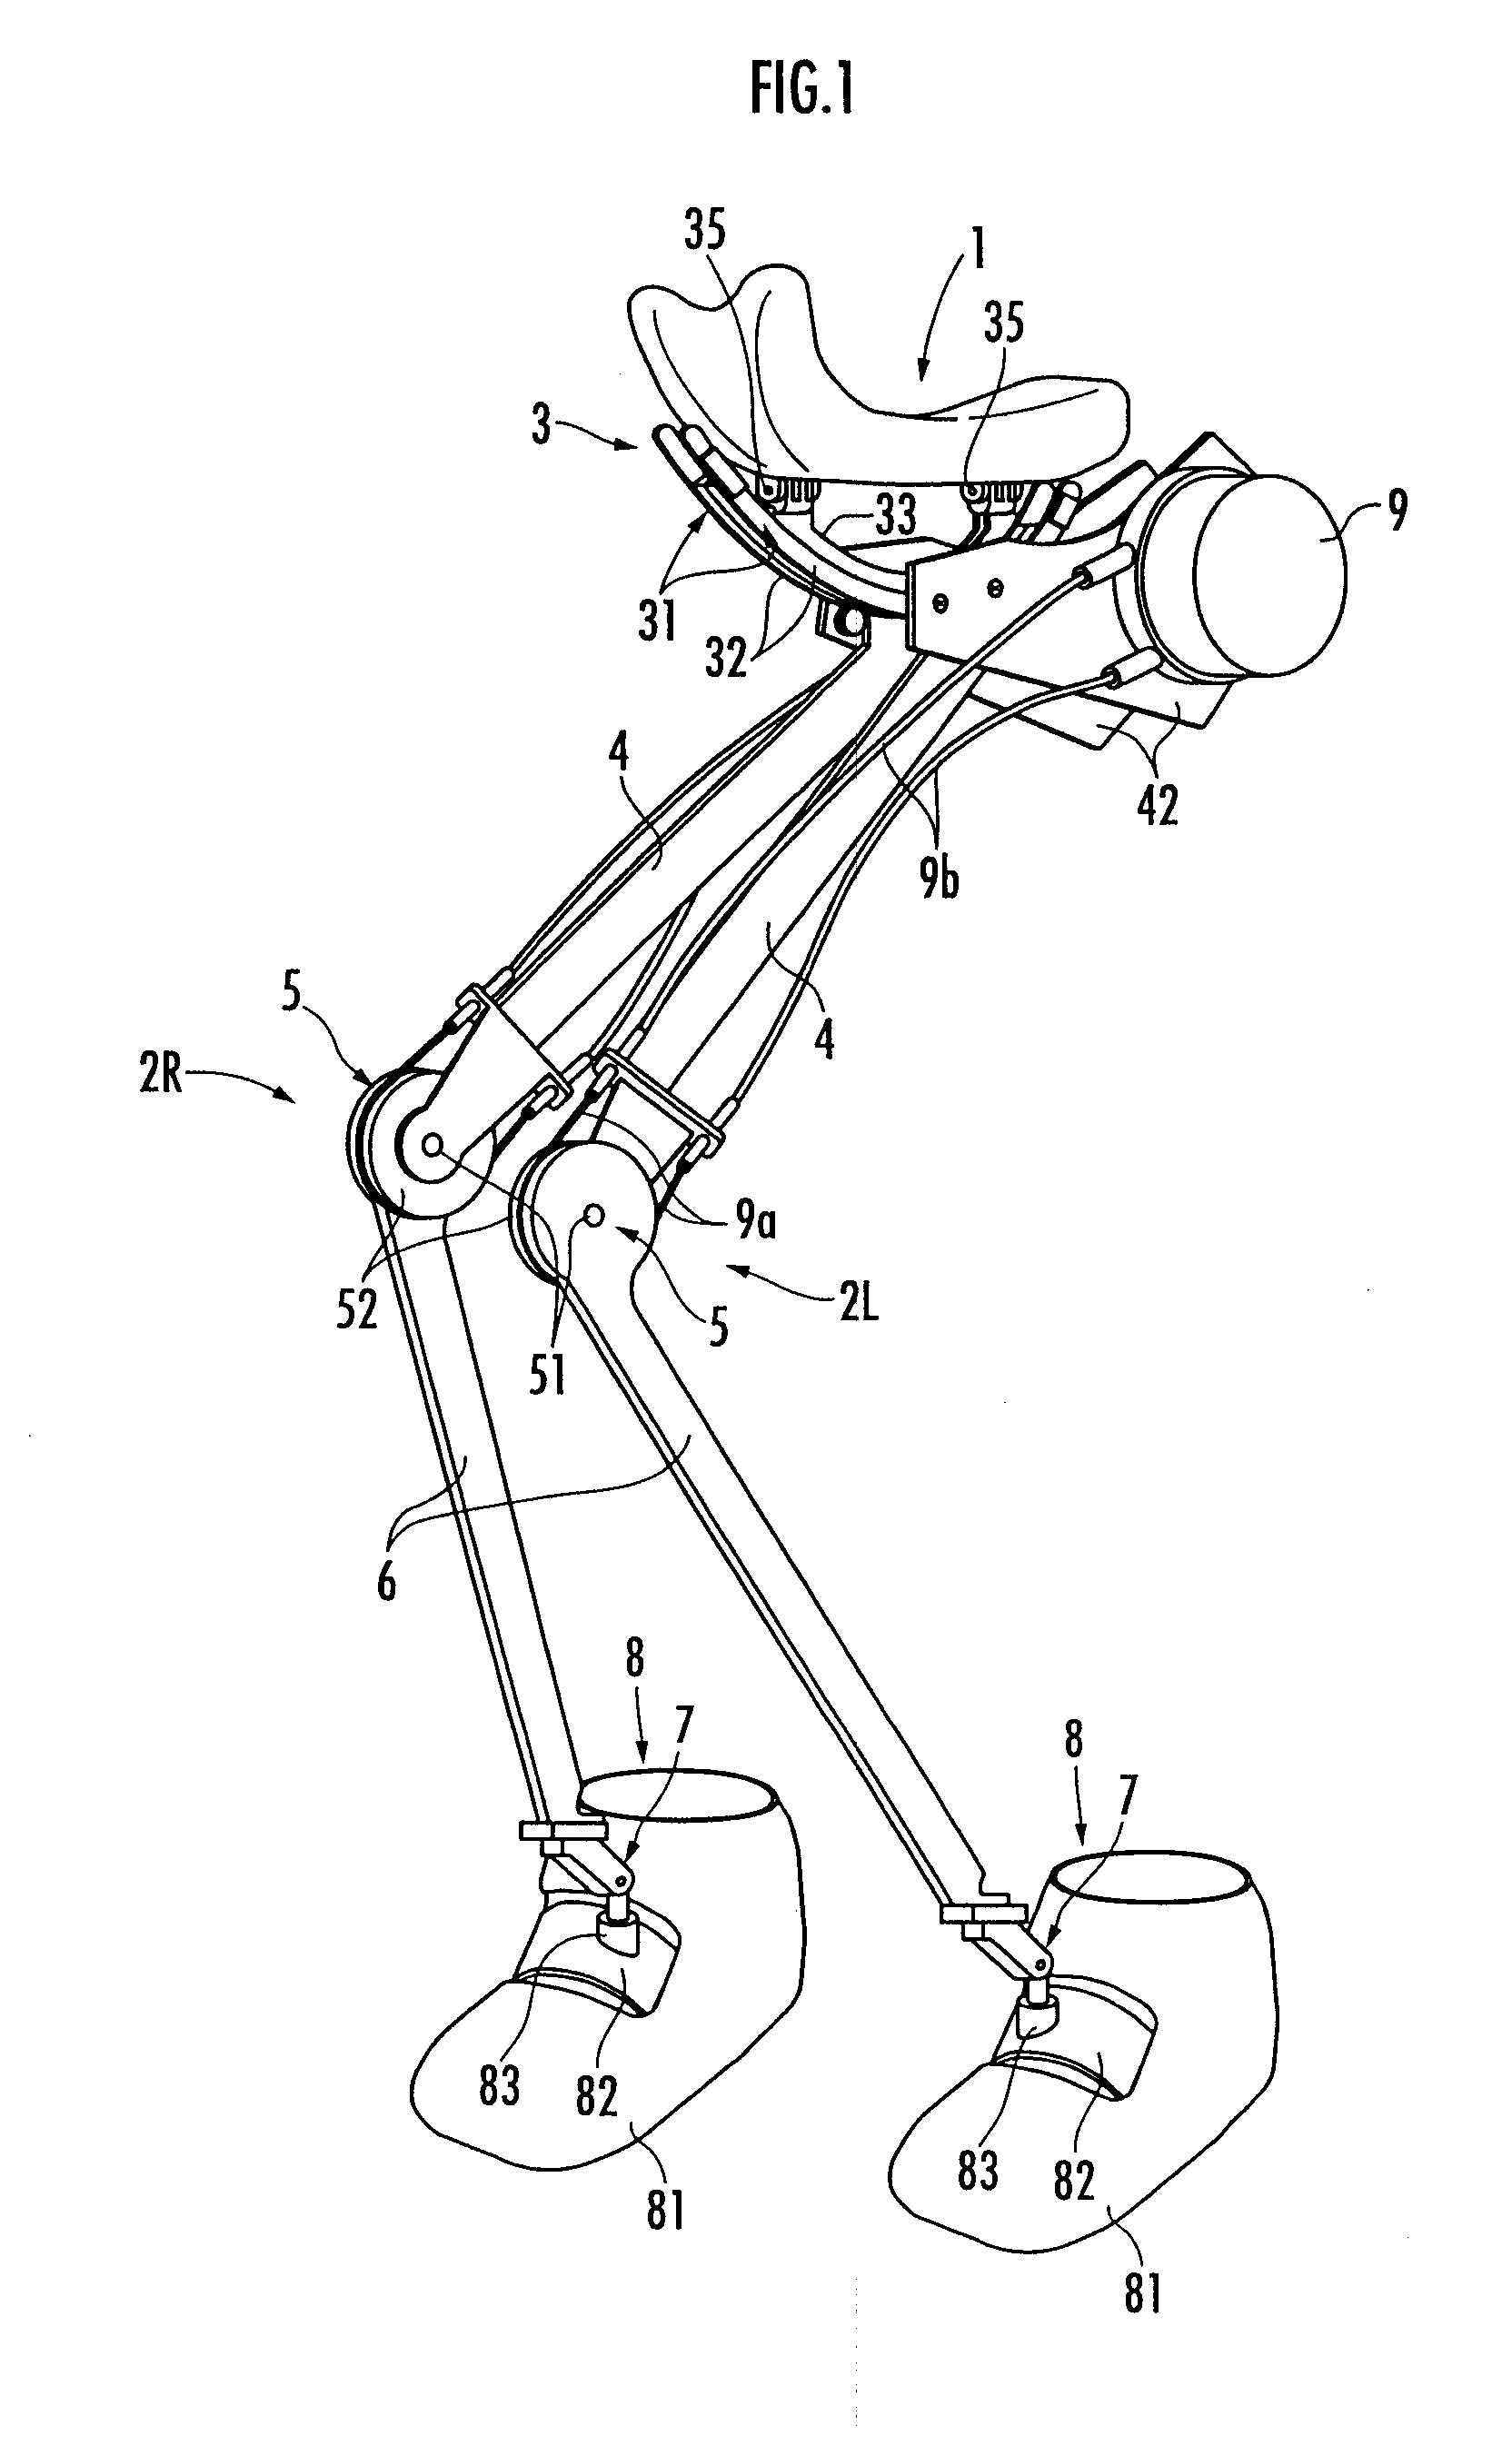 Walking assisting device